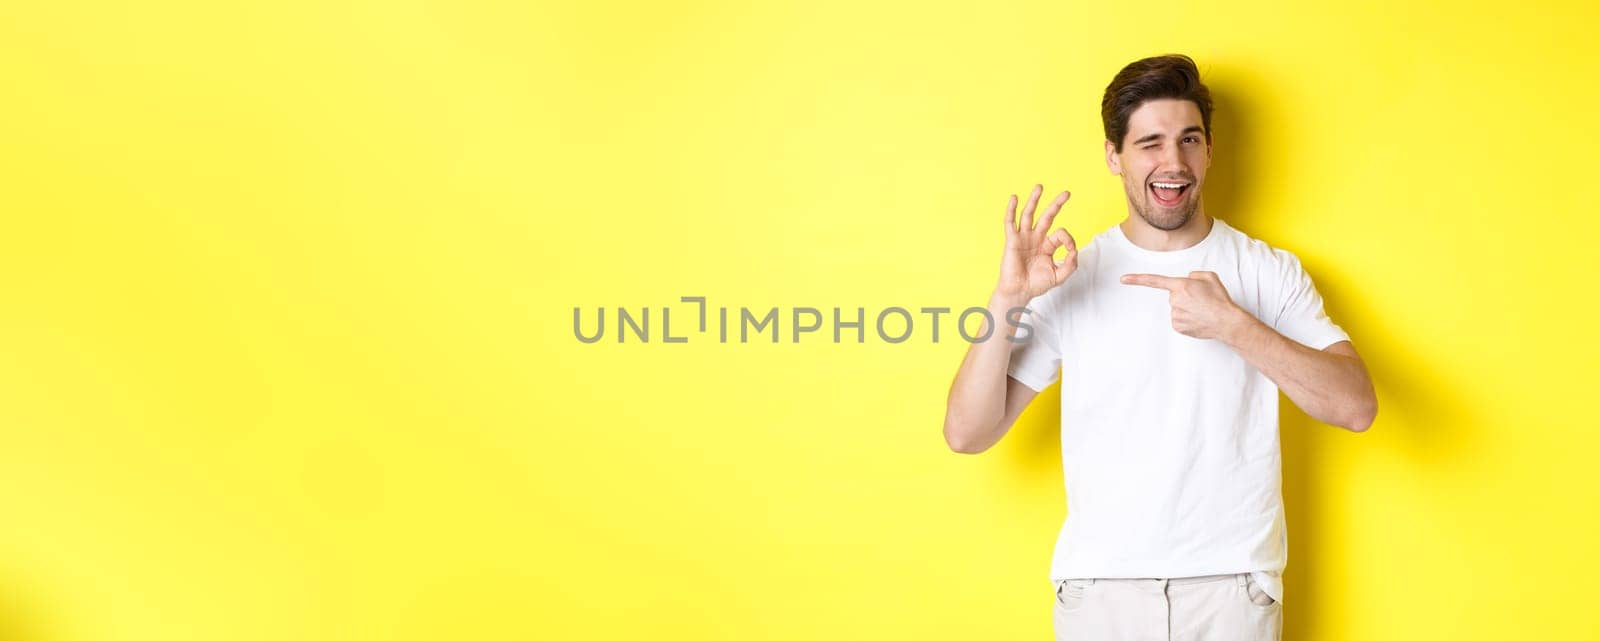 Image of handsome young man approve something, showing okay sign and winking, standing against yellow background.